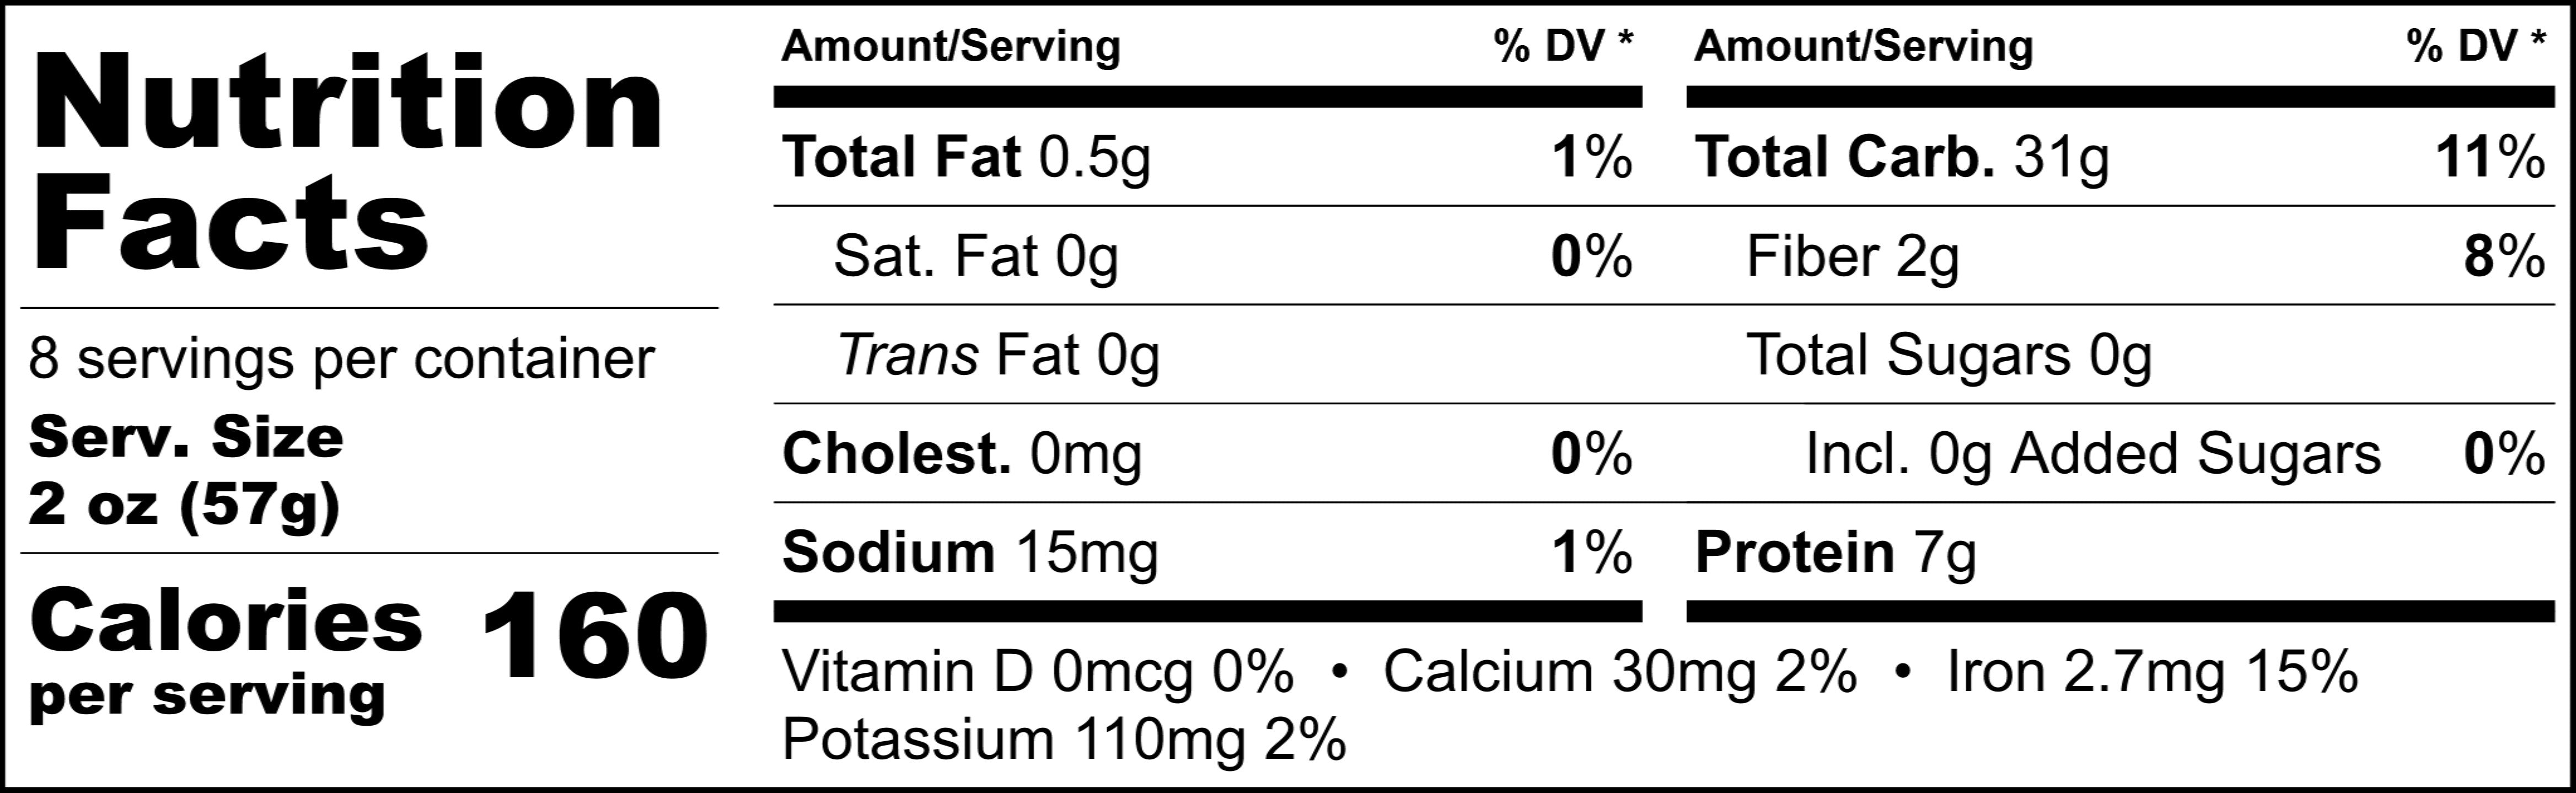 Pappardelle's Roasted Garlic Herb Fettuccine Nutritional Statement